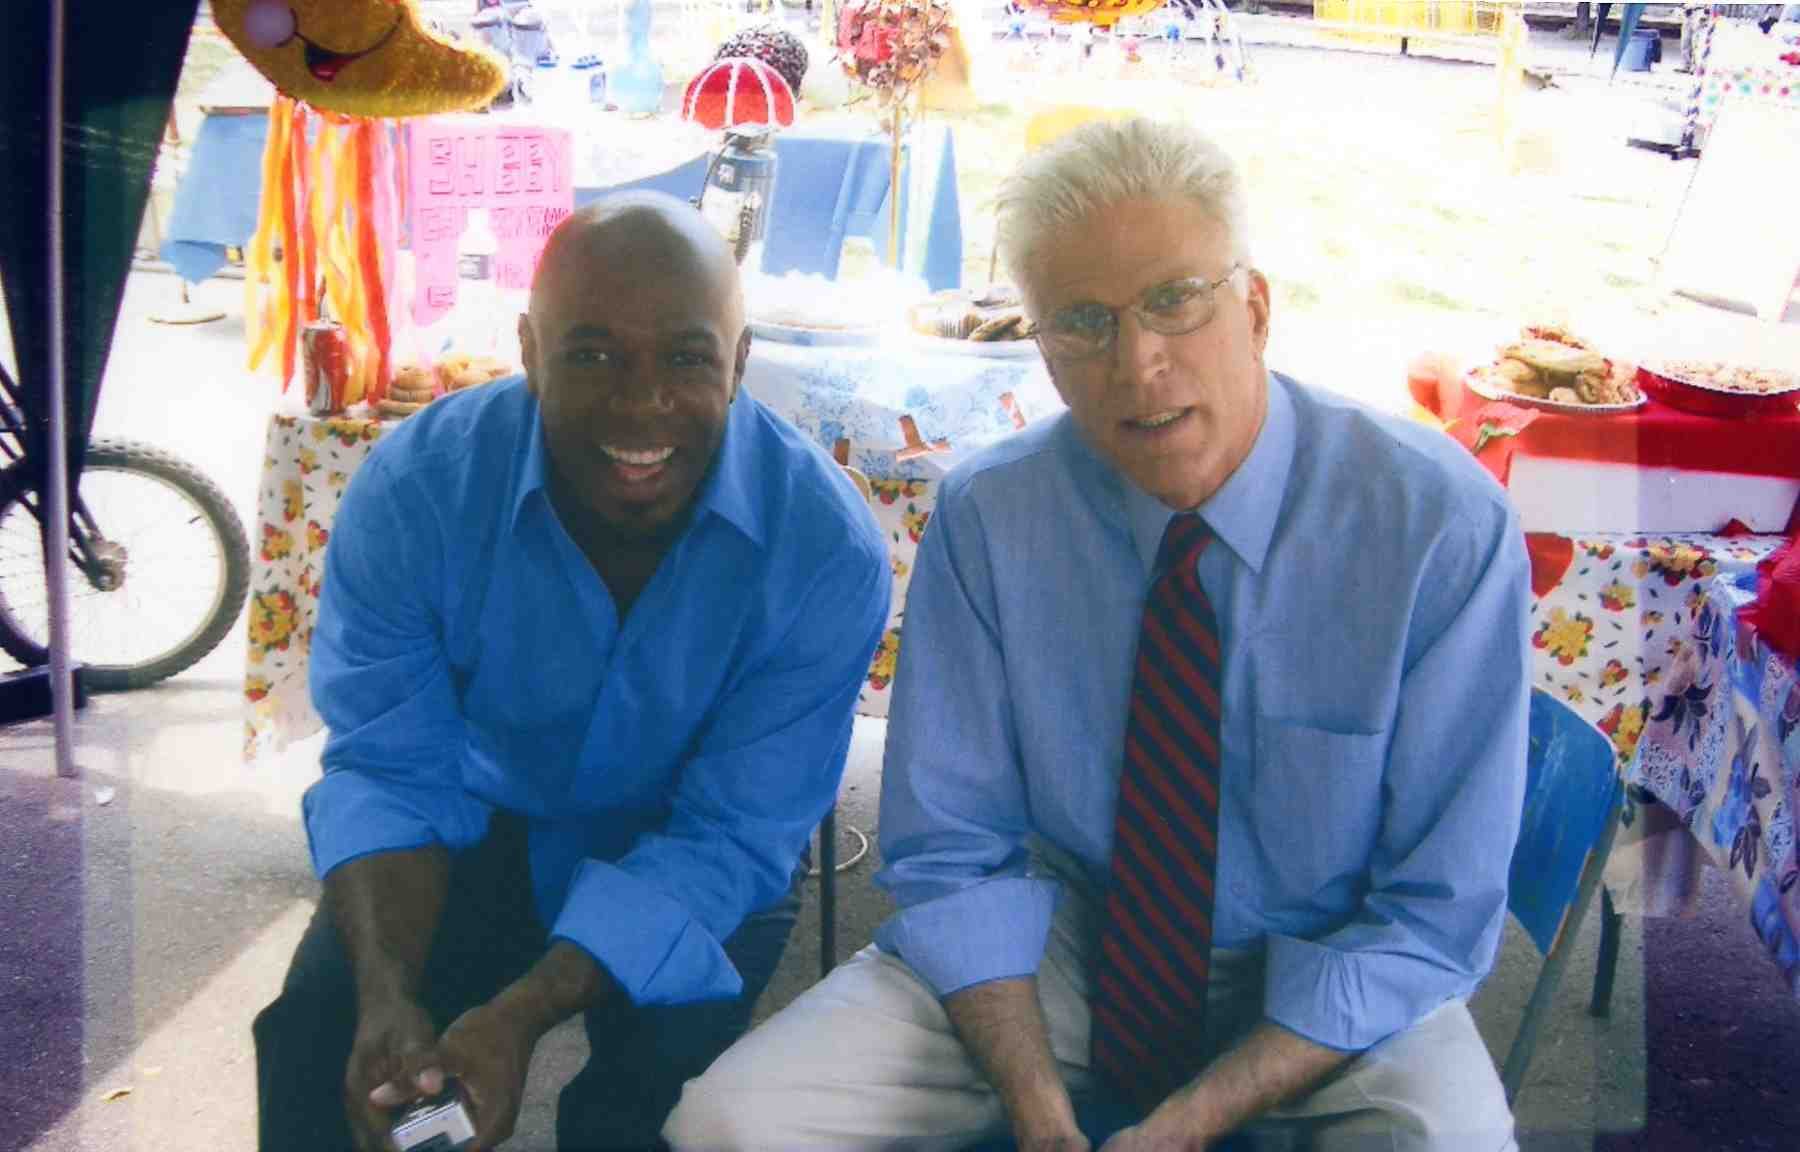 Michael Anthony Rawlins & Ted Danson on the set of Knights of the S. Bronx